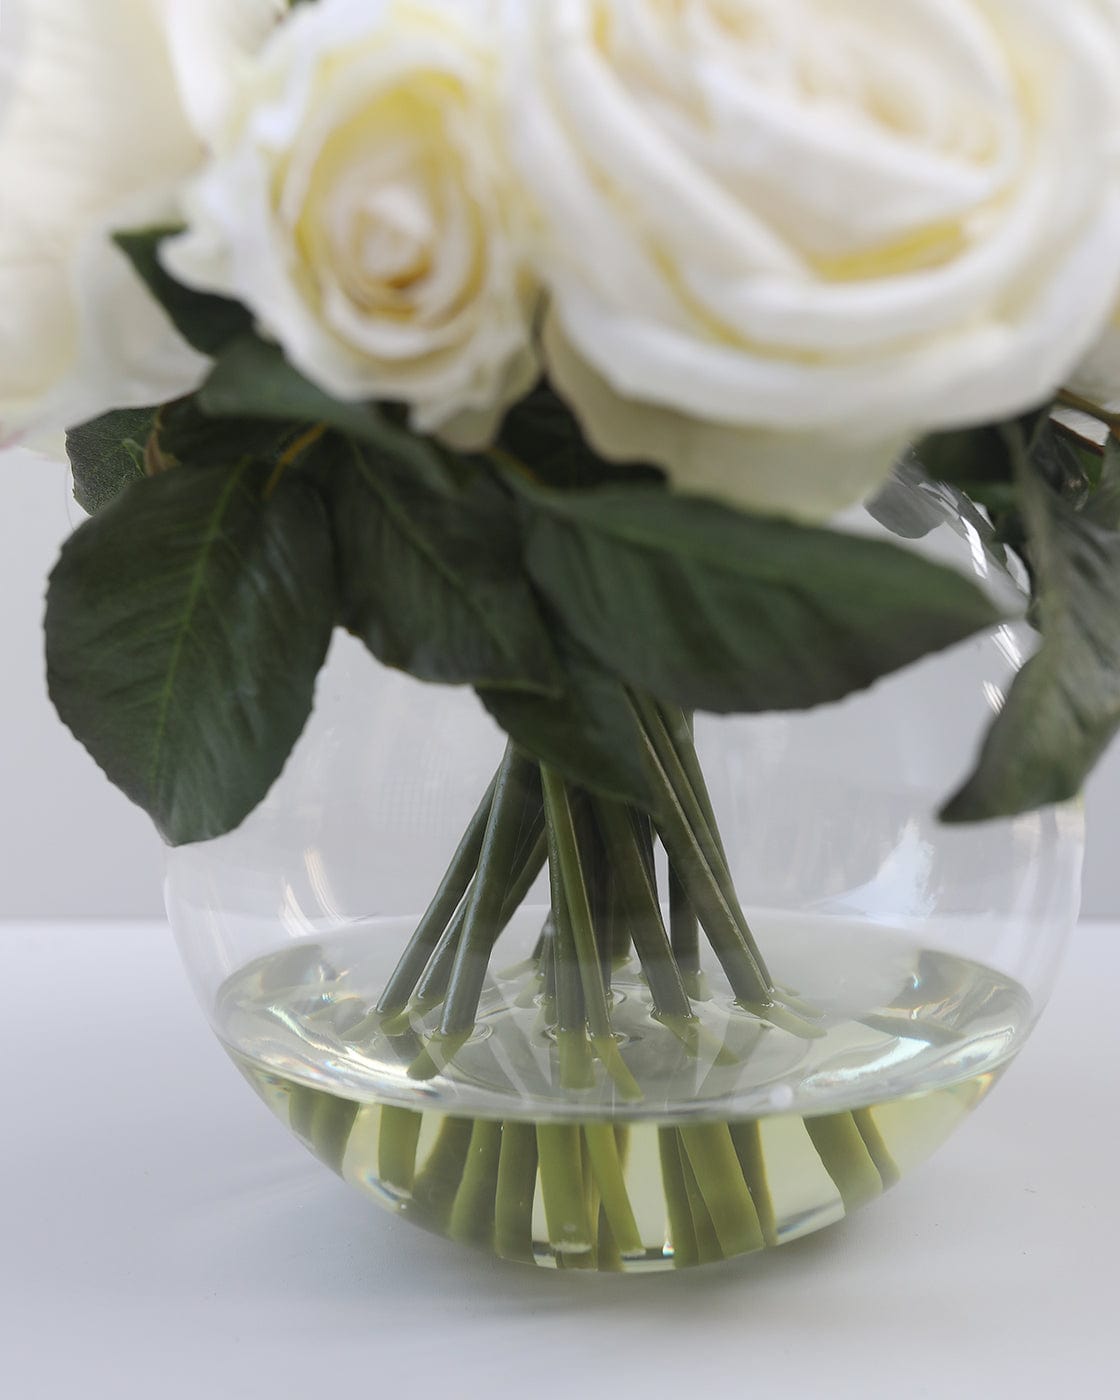 Artificial Roses Styled in Clear Vase with Acrylic Water